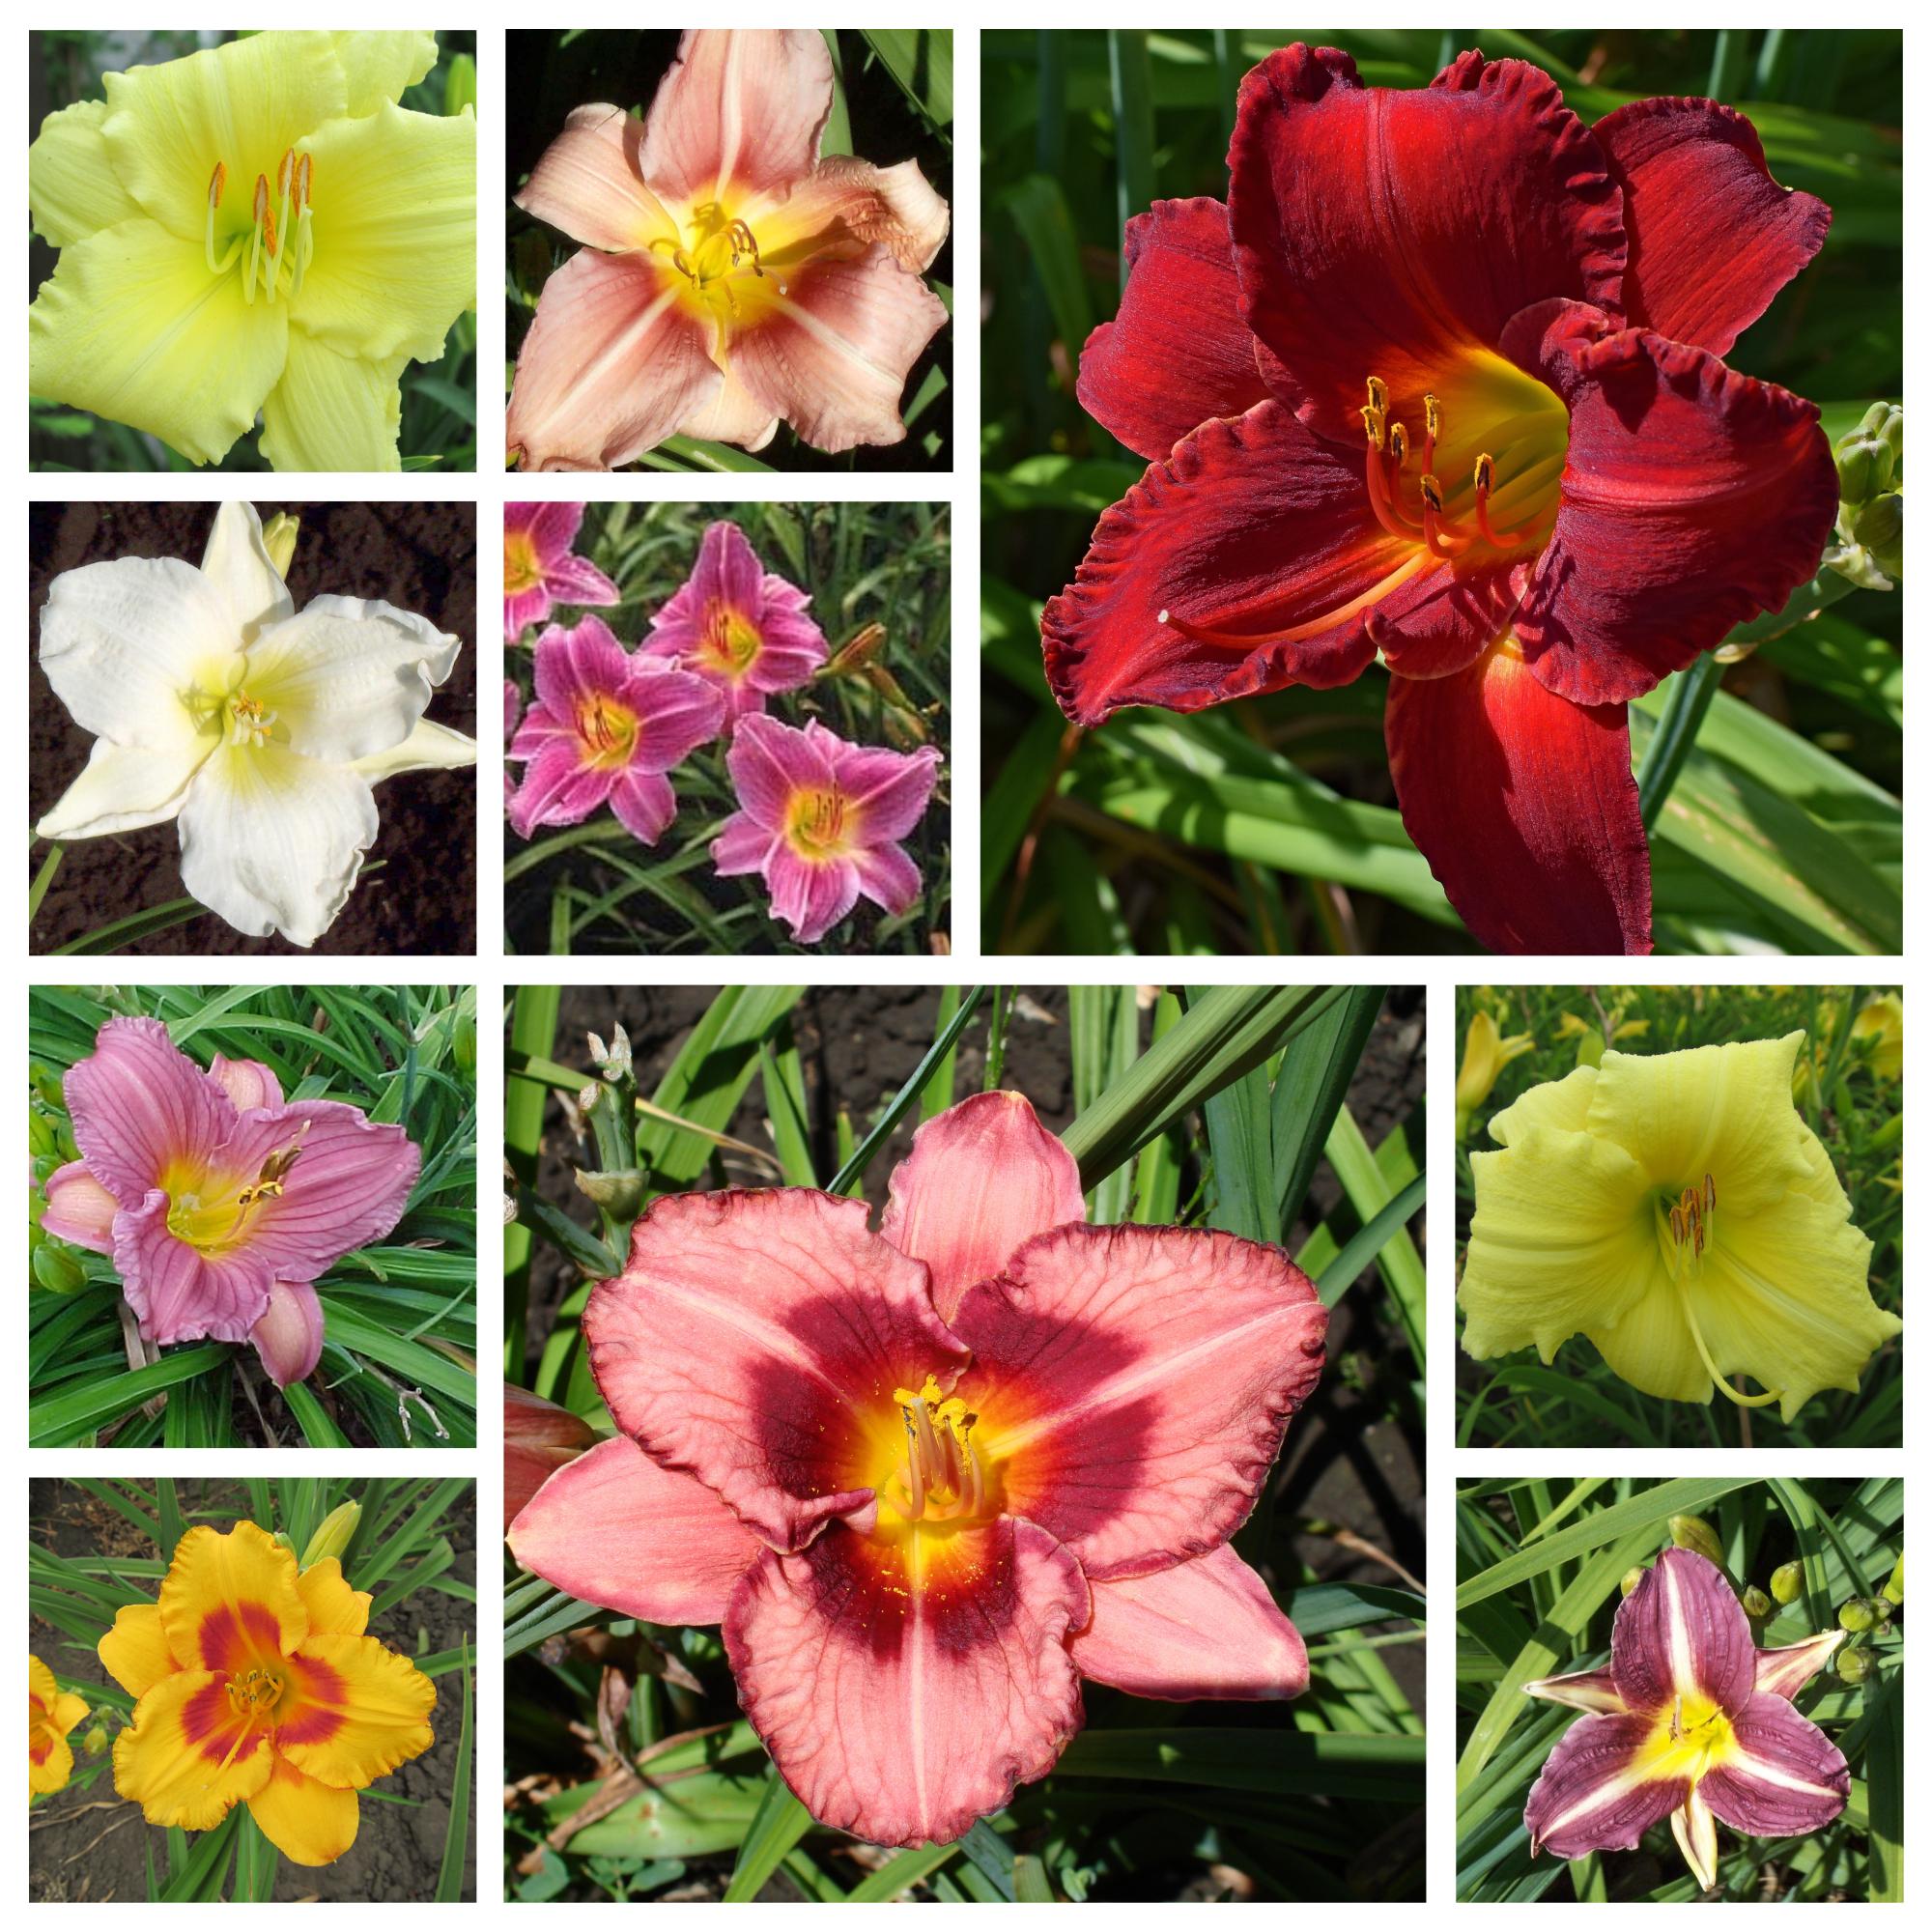 Sampler - Premium Daylily Collection from Leo Berbee Bulb Company